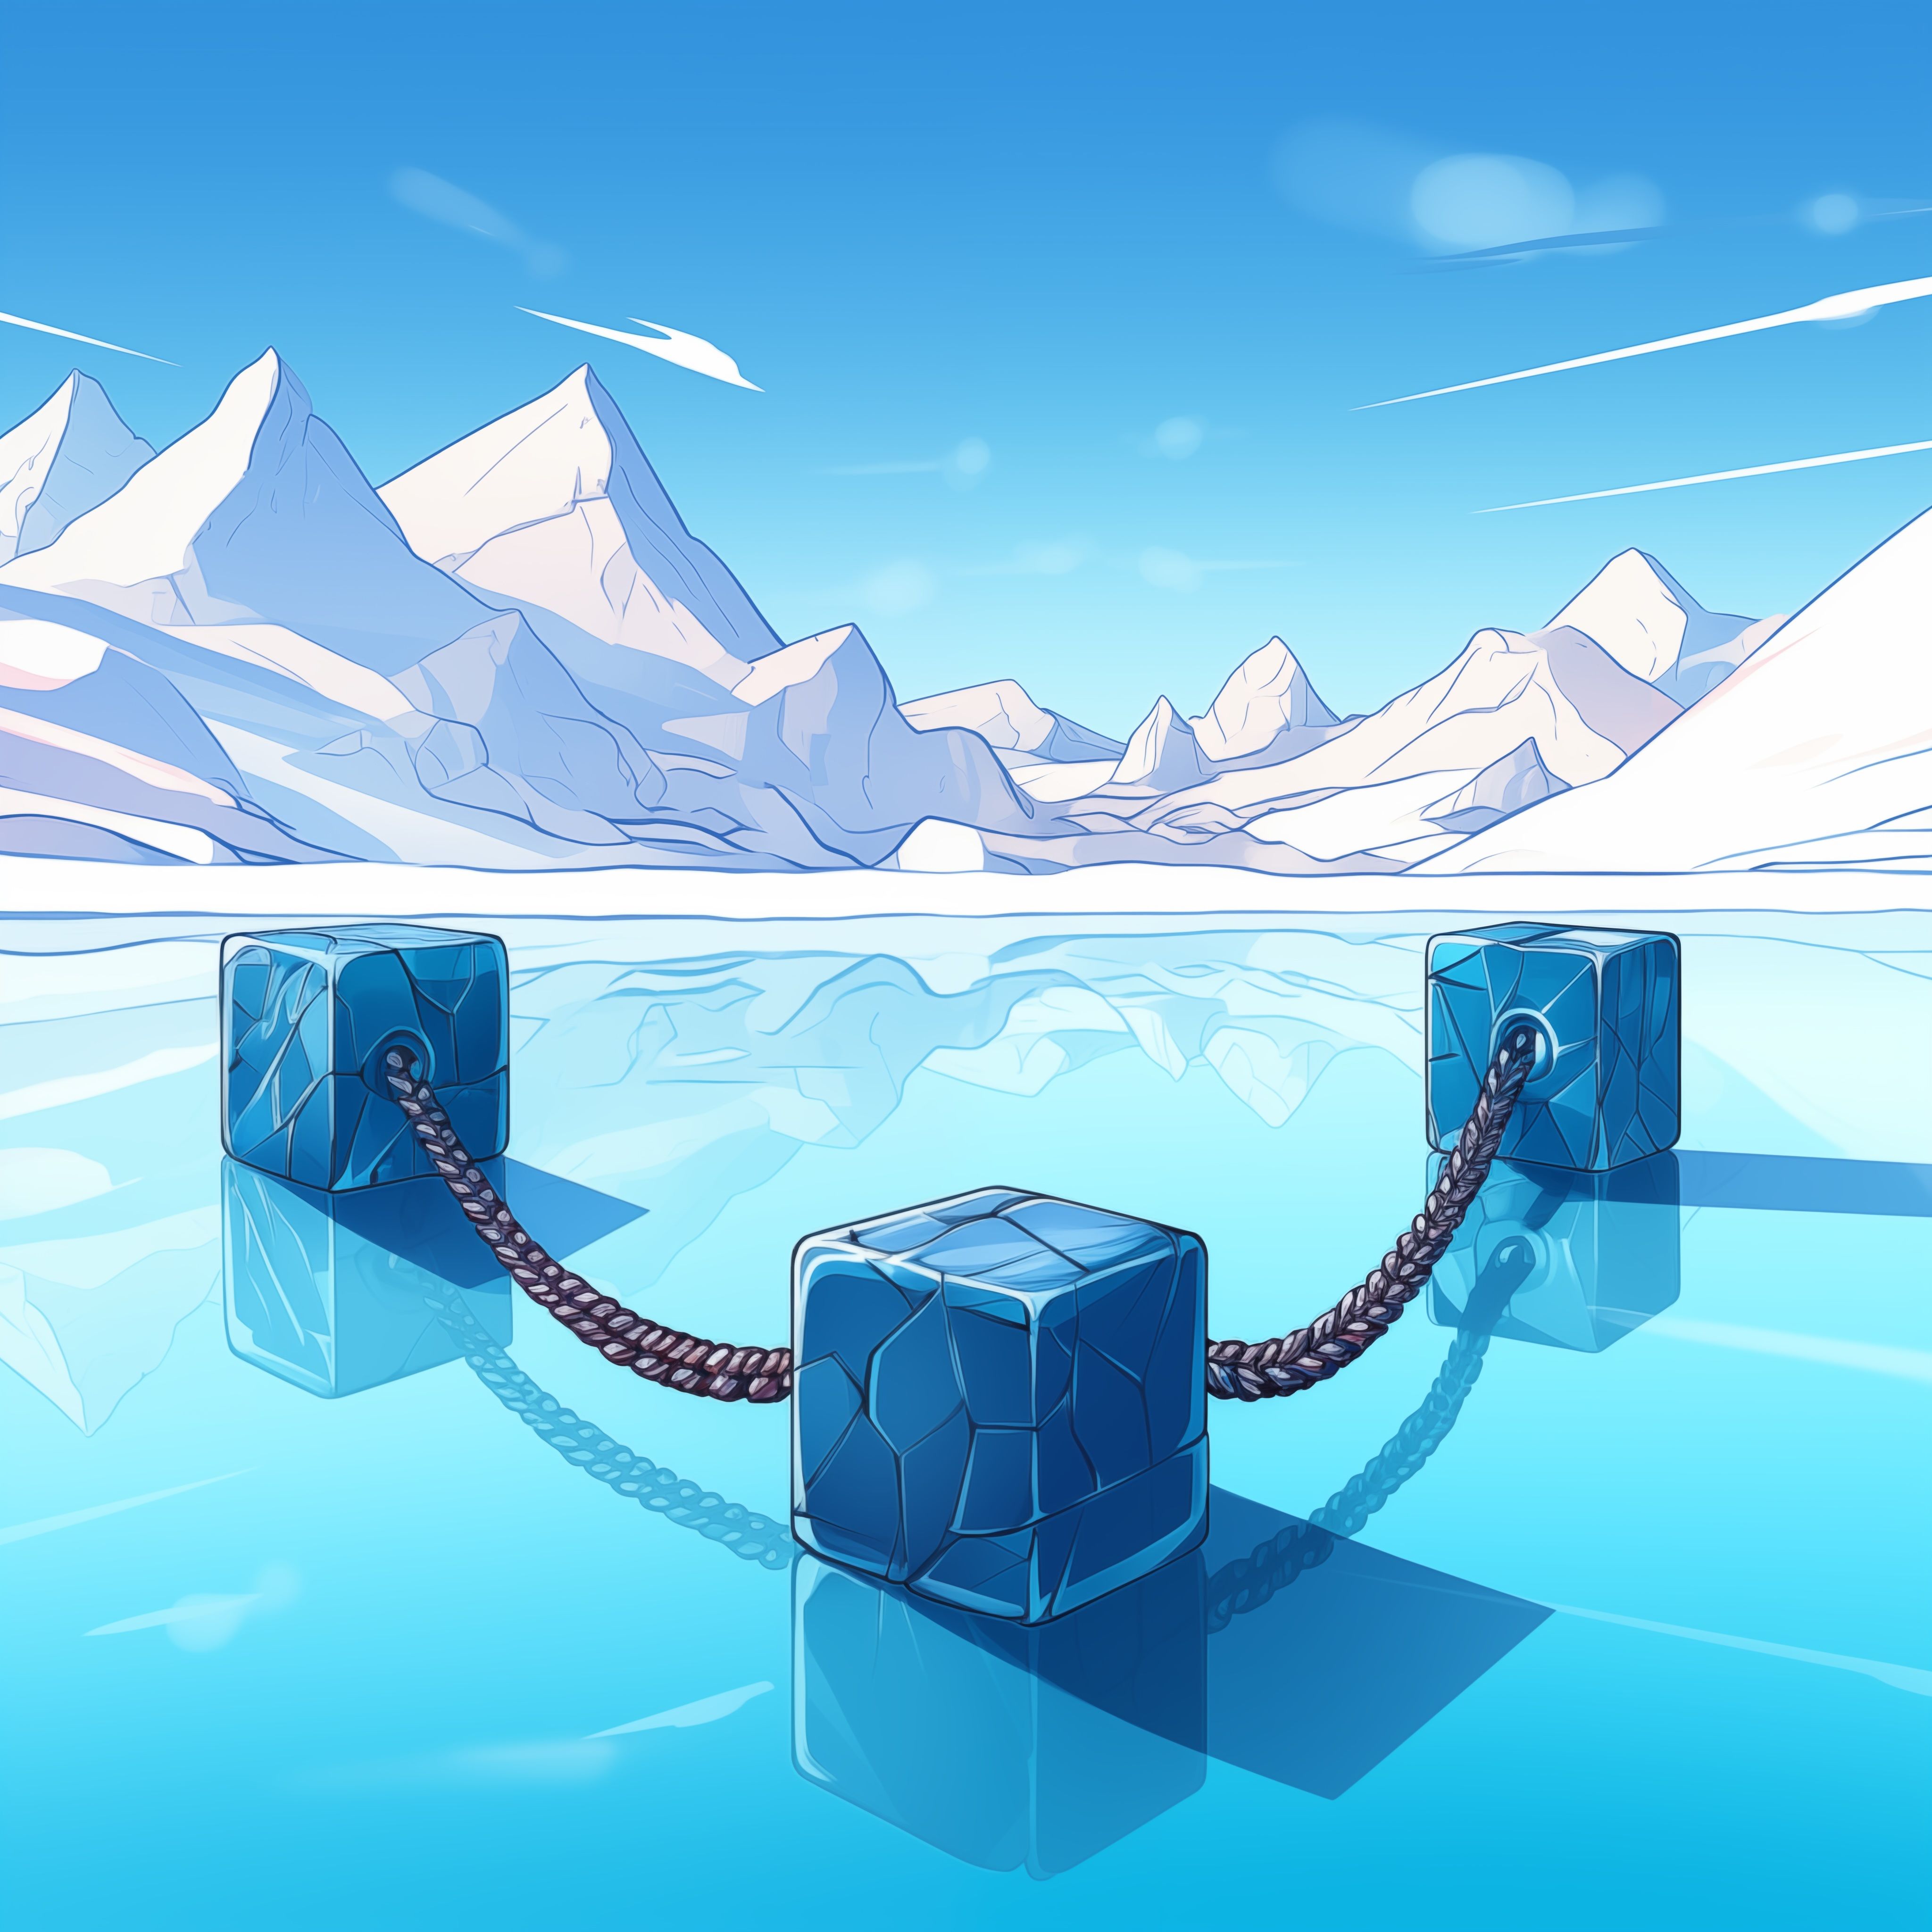 Chained ice blocks in a winter landscape